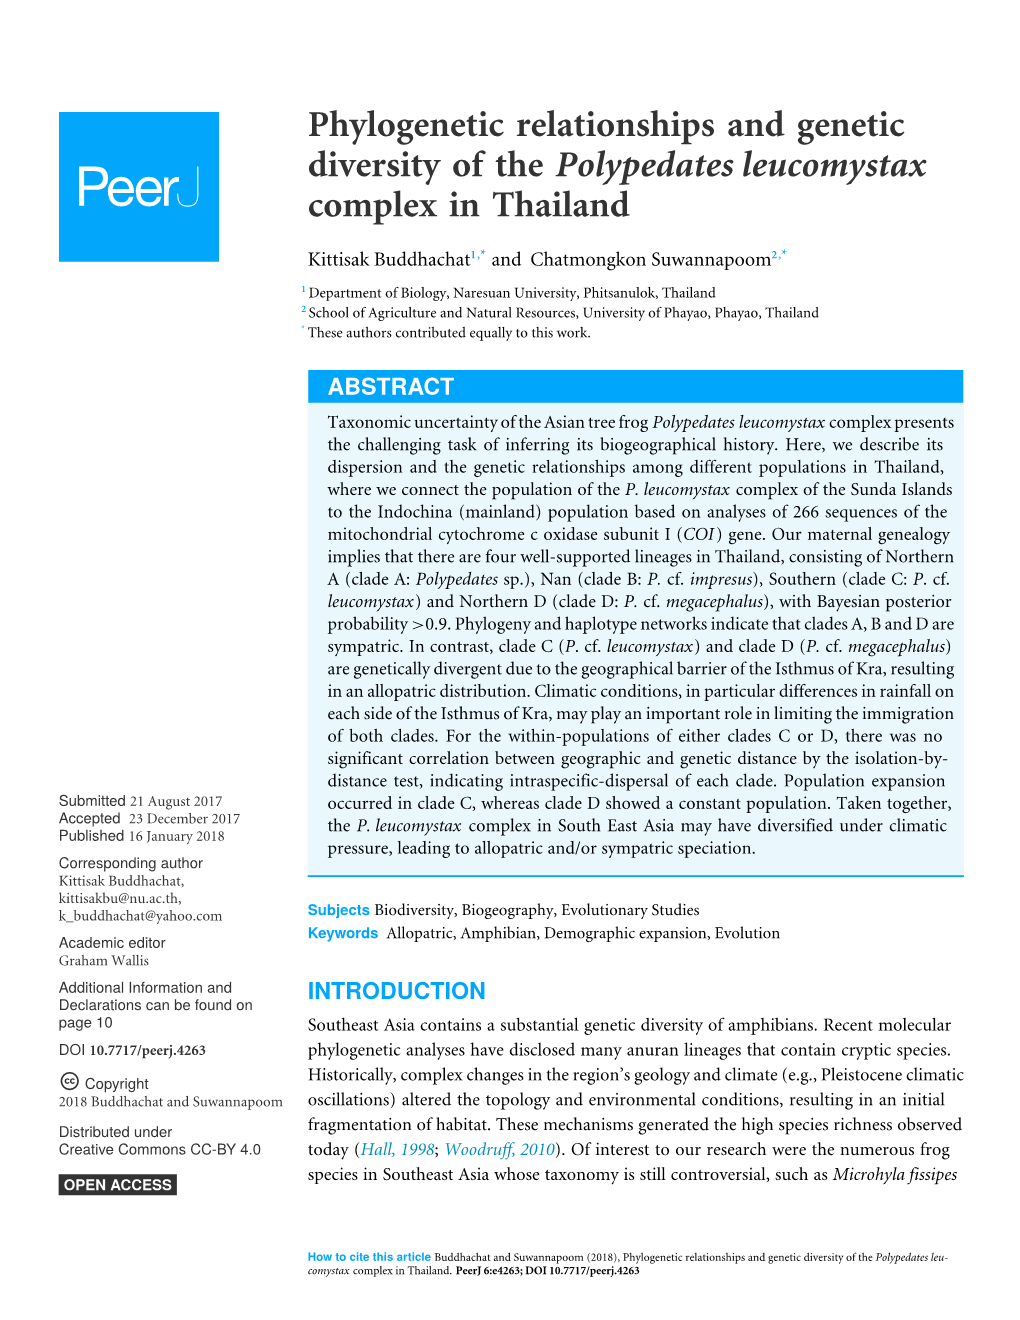 Phylogenetic Relationships and Genetic Diversity of the Polypedates Leucomystax Complex in Thailand